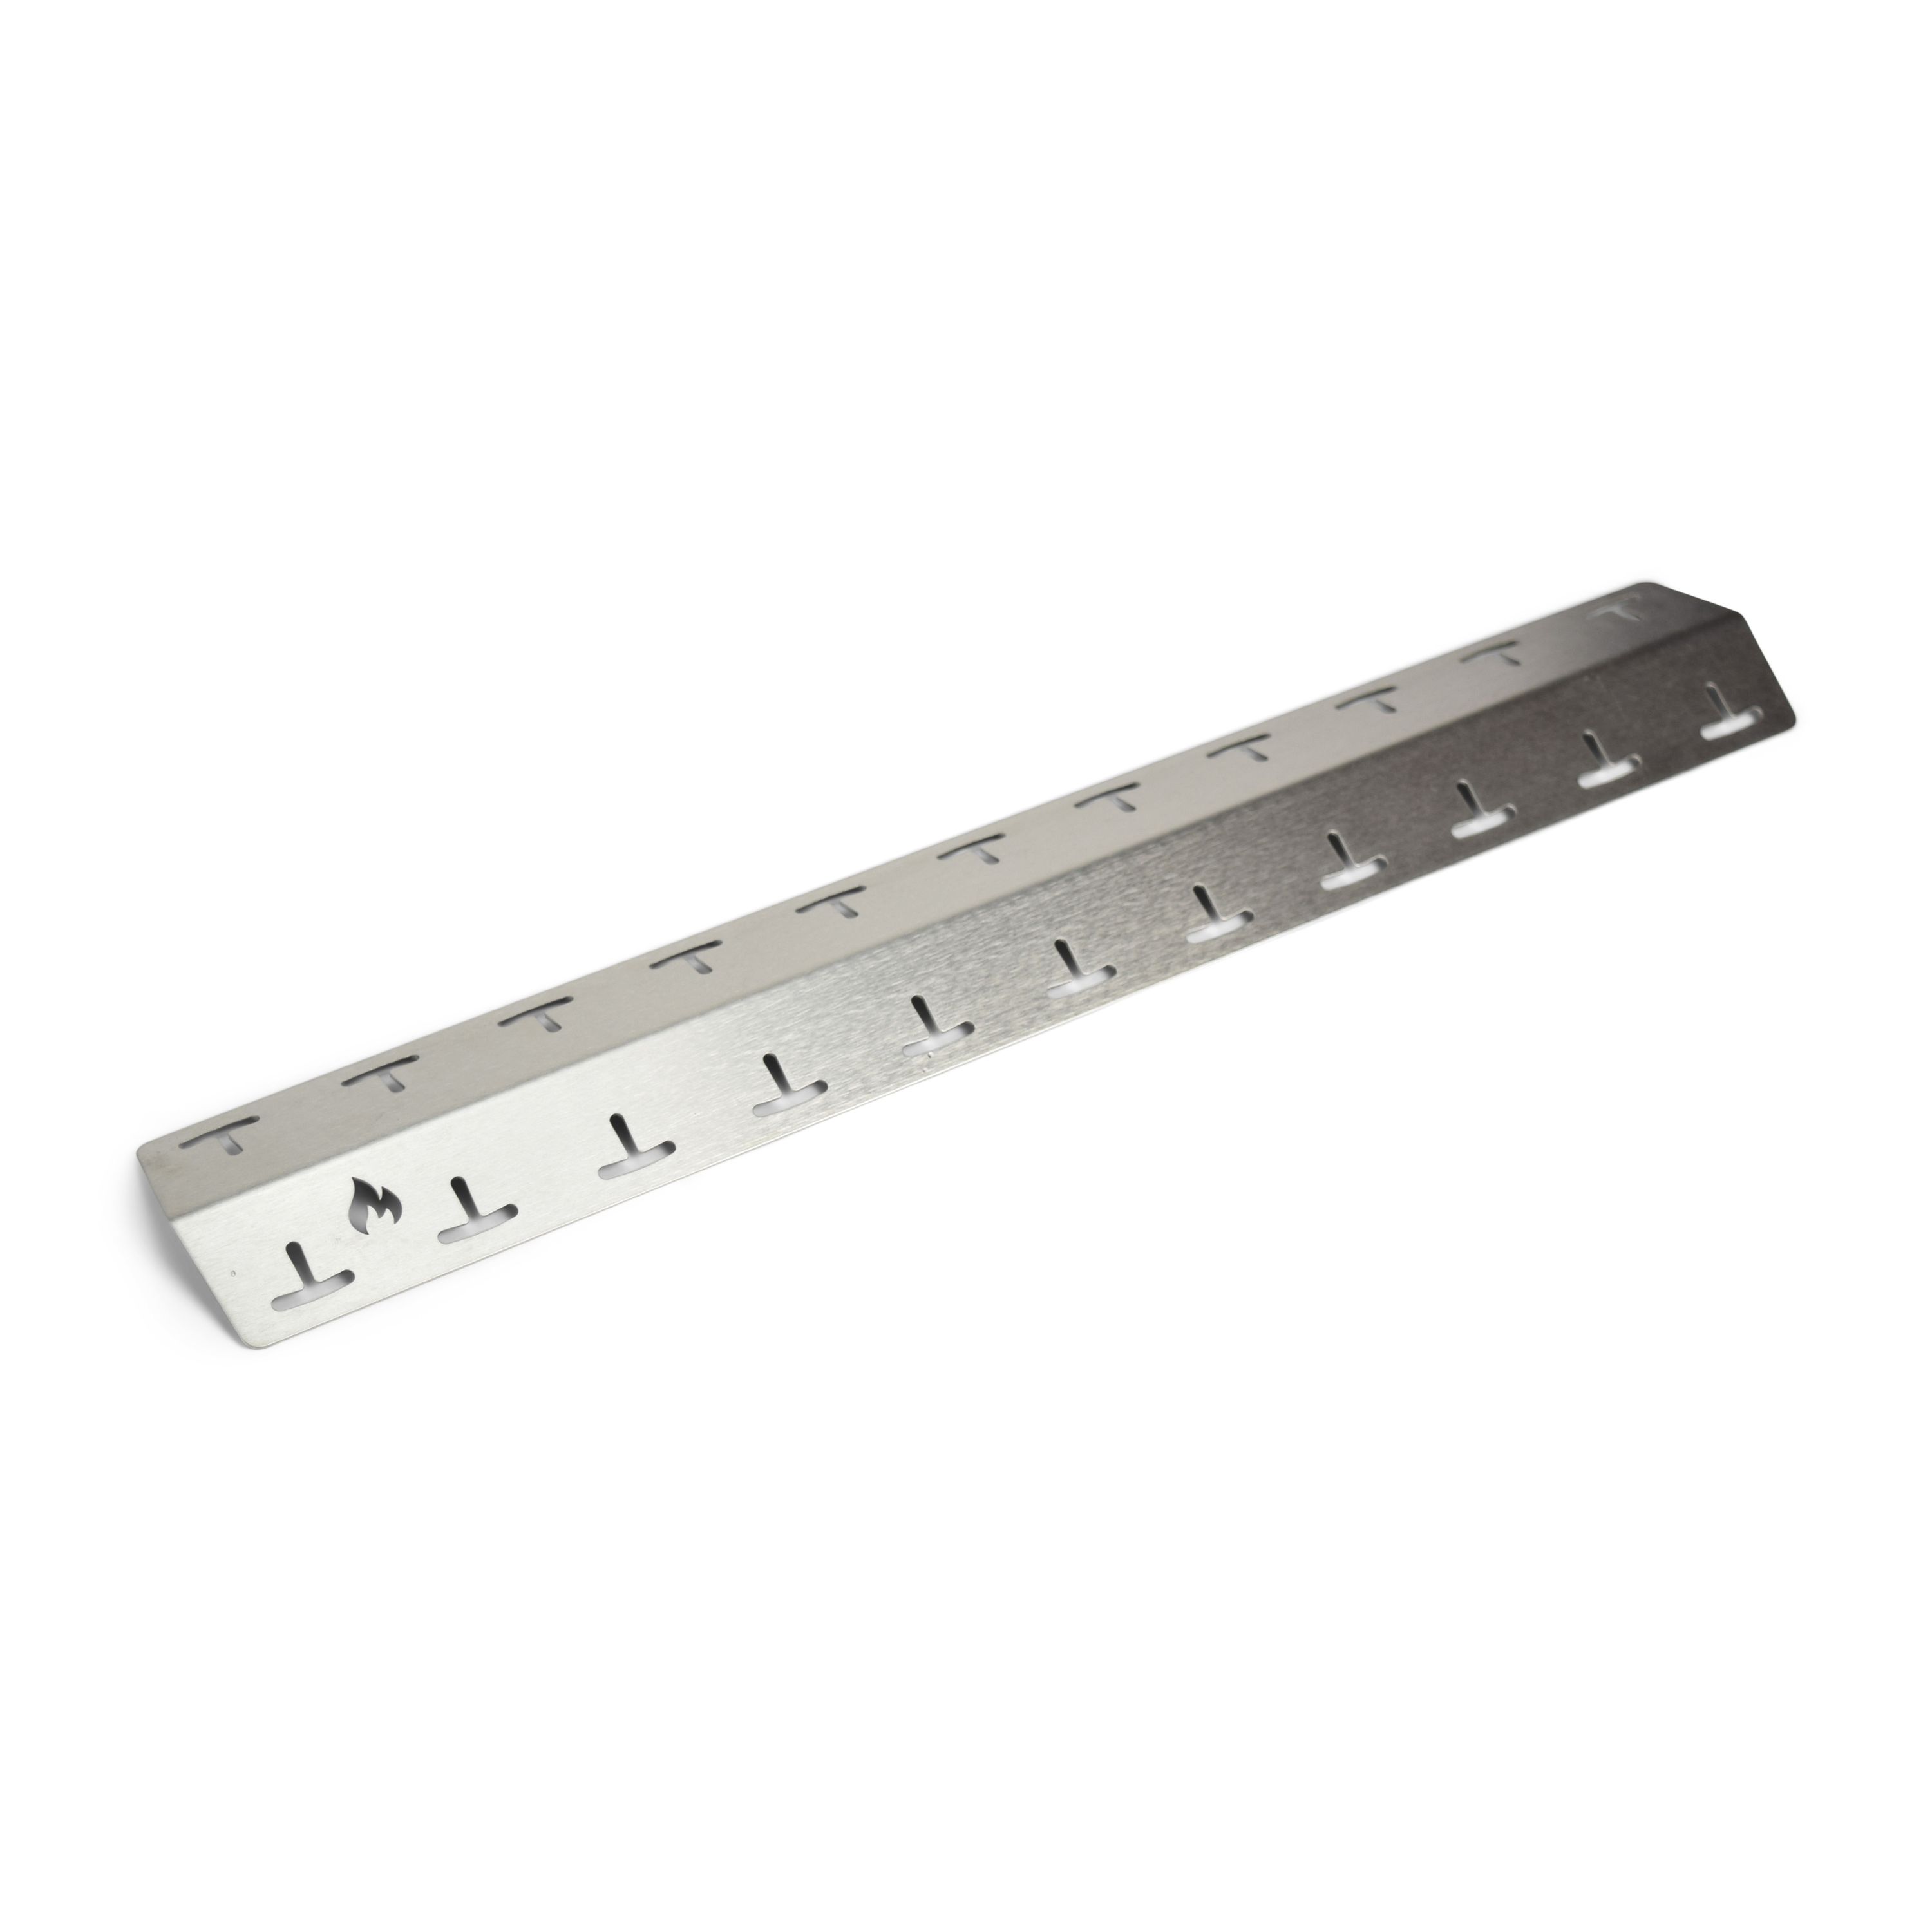 Stainless steel flavouring bar for Campingaz 